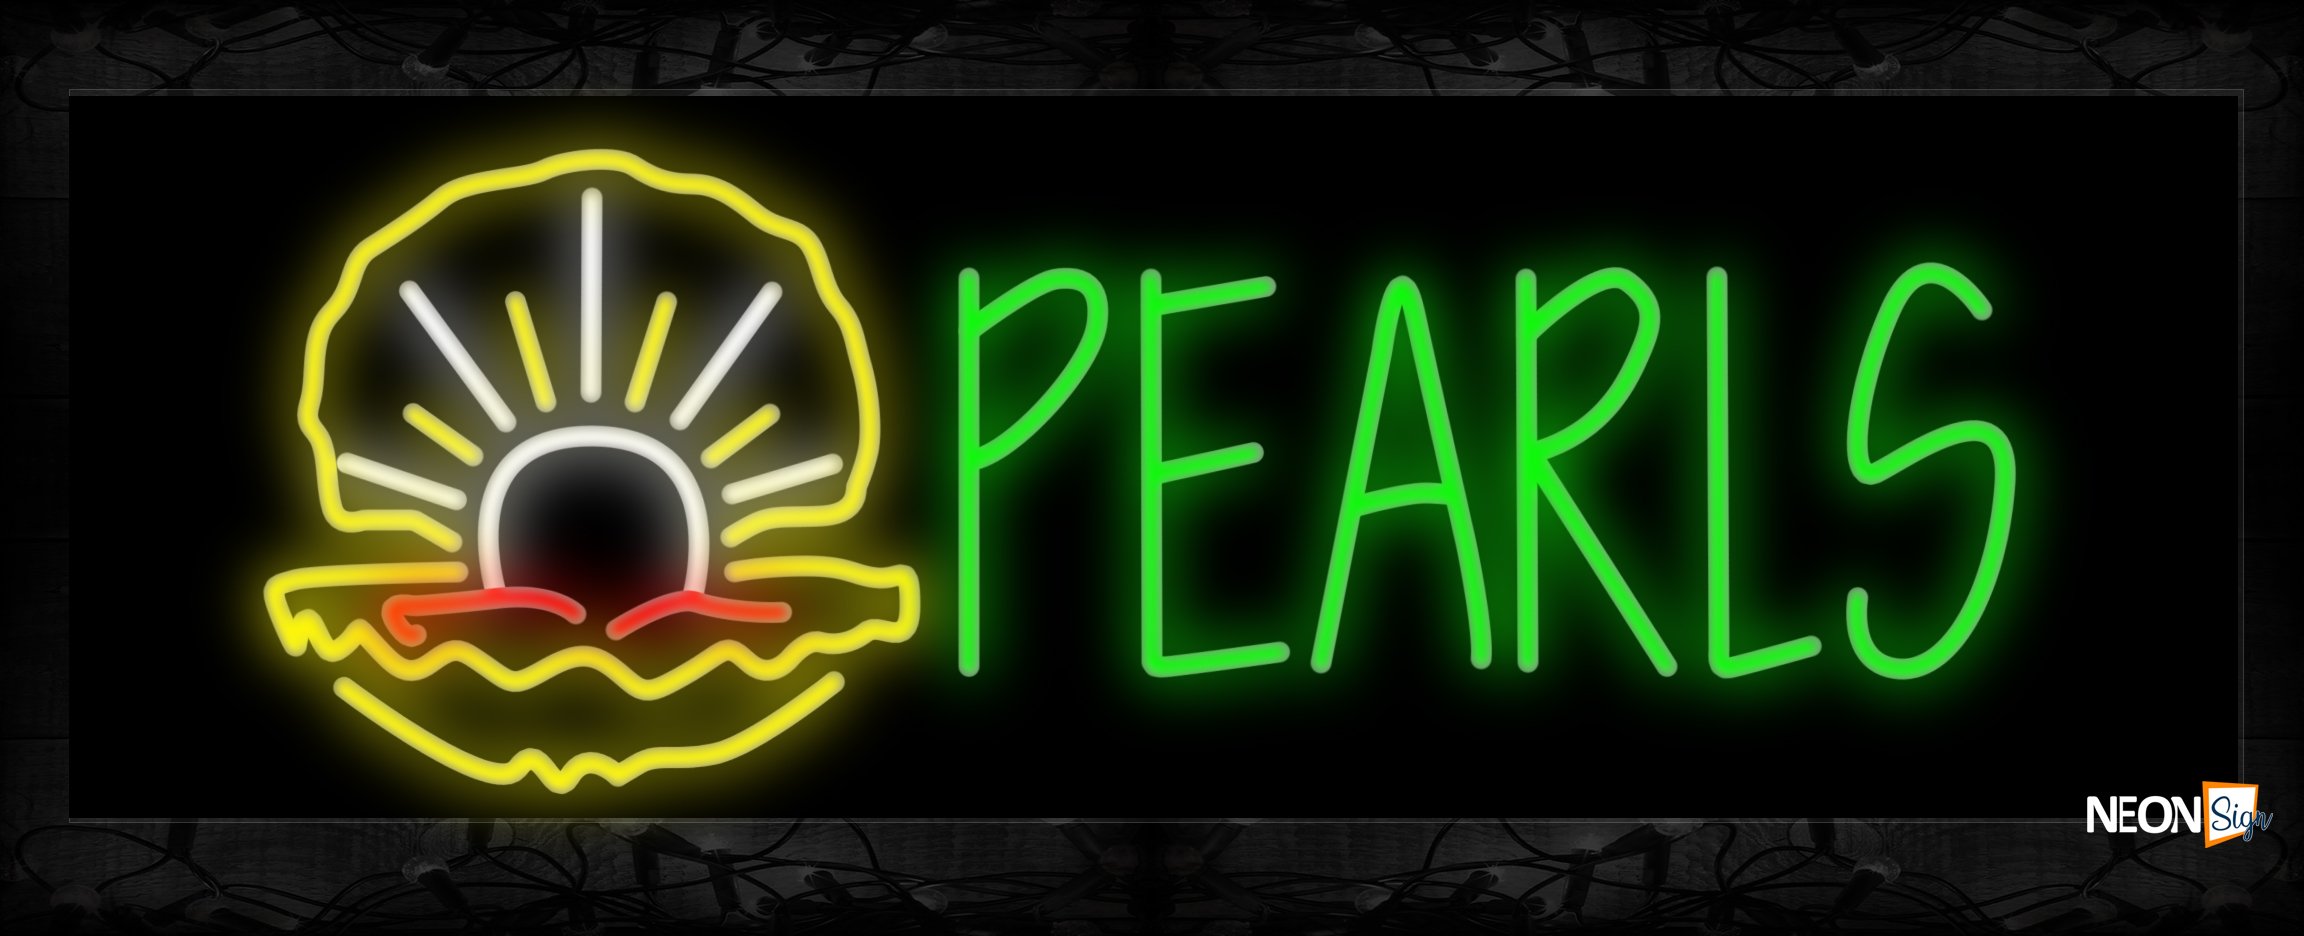 Image of 11459 Pearls with logo Neon Sign 13x32 Black Backing